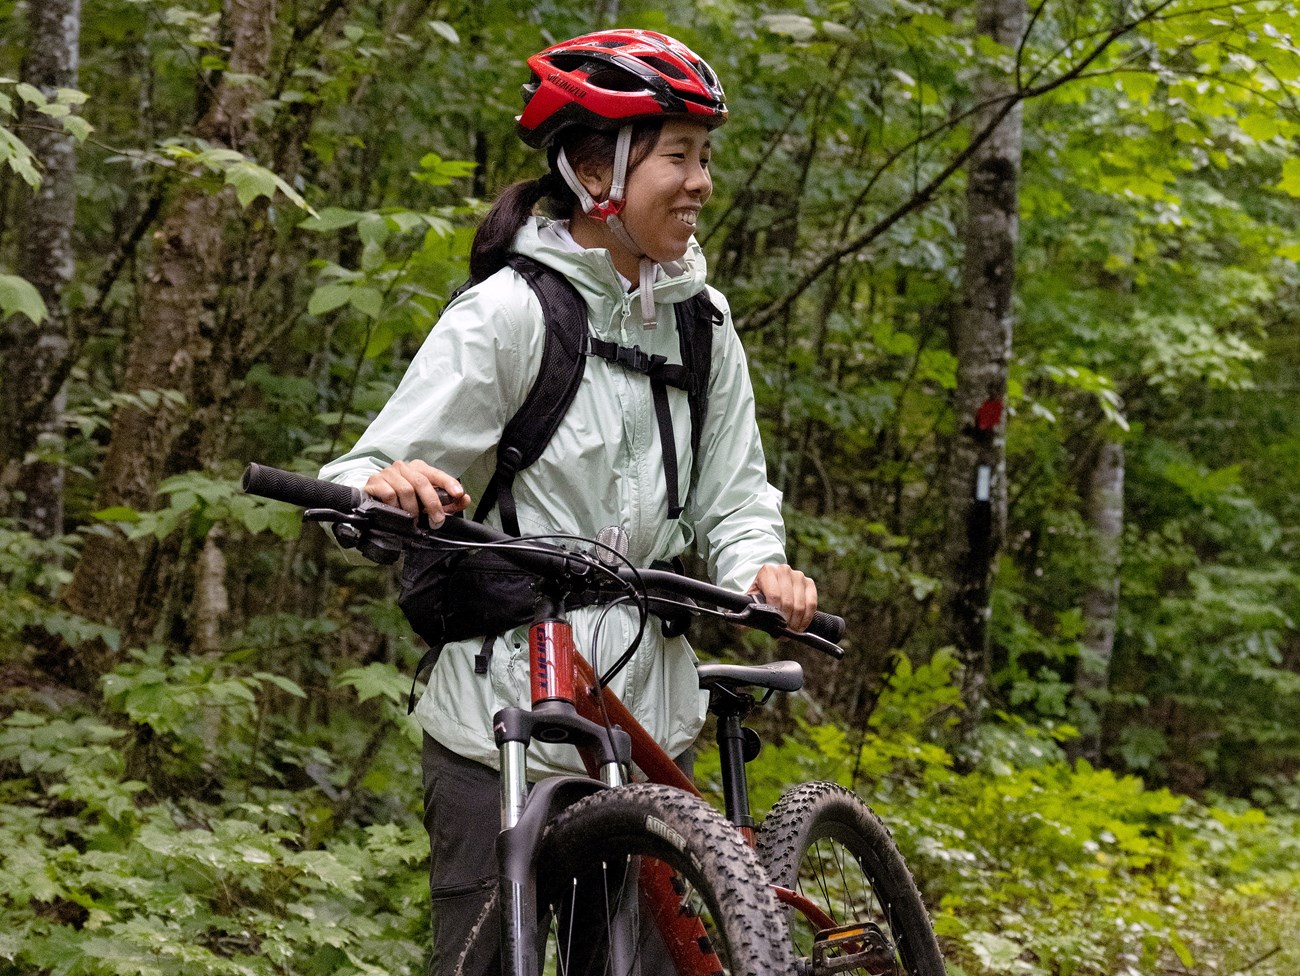 A woman stands smiling next to her red bike. She is wearing a red helmet and backpack. She is on an old logging road surrounded by green grass and foliage.